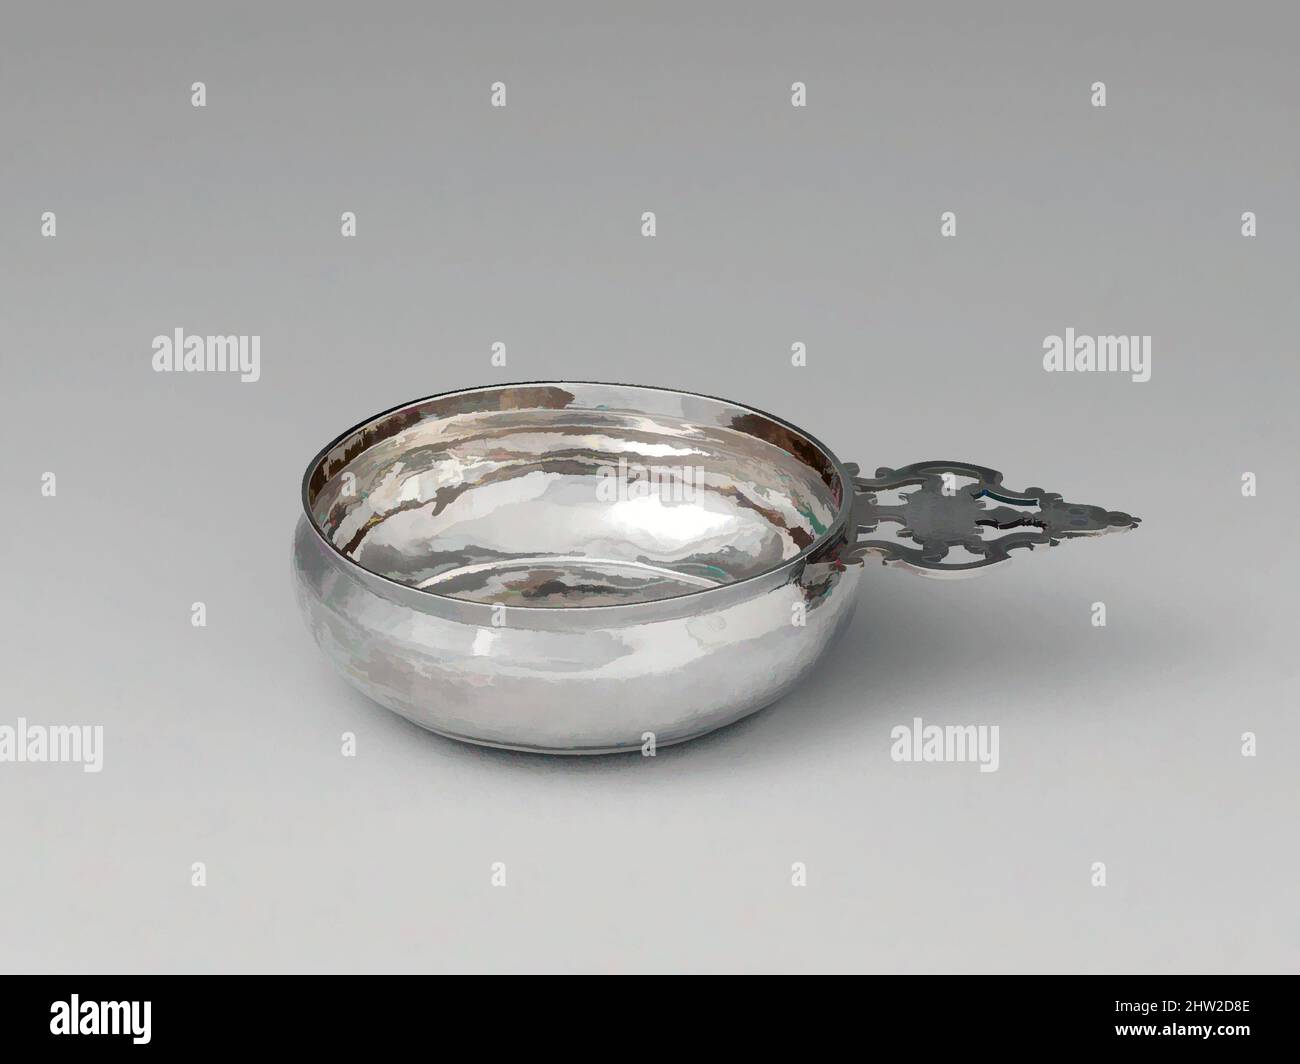 Art inspired by Porringer, 1715–30, Made in Boston, Massachusetts, United States, American, Silver, Overall: 1 13/16 x 7 5/8 in. (4.6 x 19.4 cm); 7 oz. 4 dwt. (224.1 g), Silver, William Cowell Sr. (1682/83–1736, Classic works modernized by Artotop with a splash of modernity. Shapes, color and value, eye-catching visual impact on art. Emotions through freedom of artworks in a contemporary way. A timeless message pursuing a wildly creative new direction. Artists turning to the digital medium and creating the Artotop NFT Stock Photo